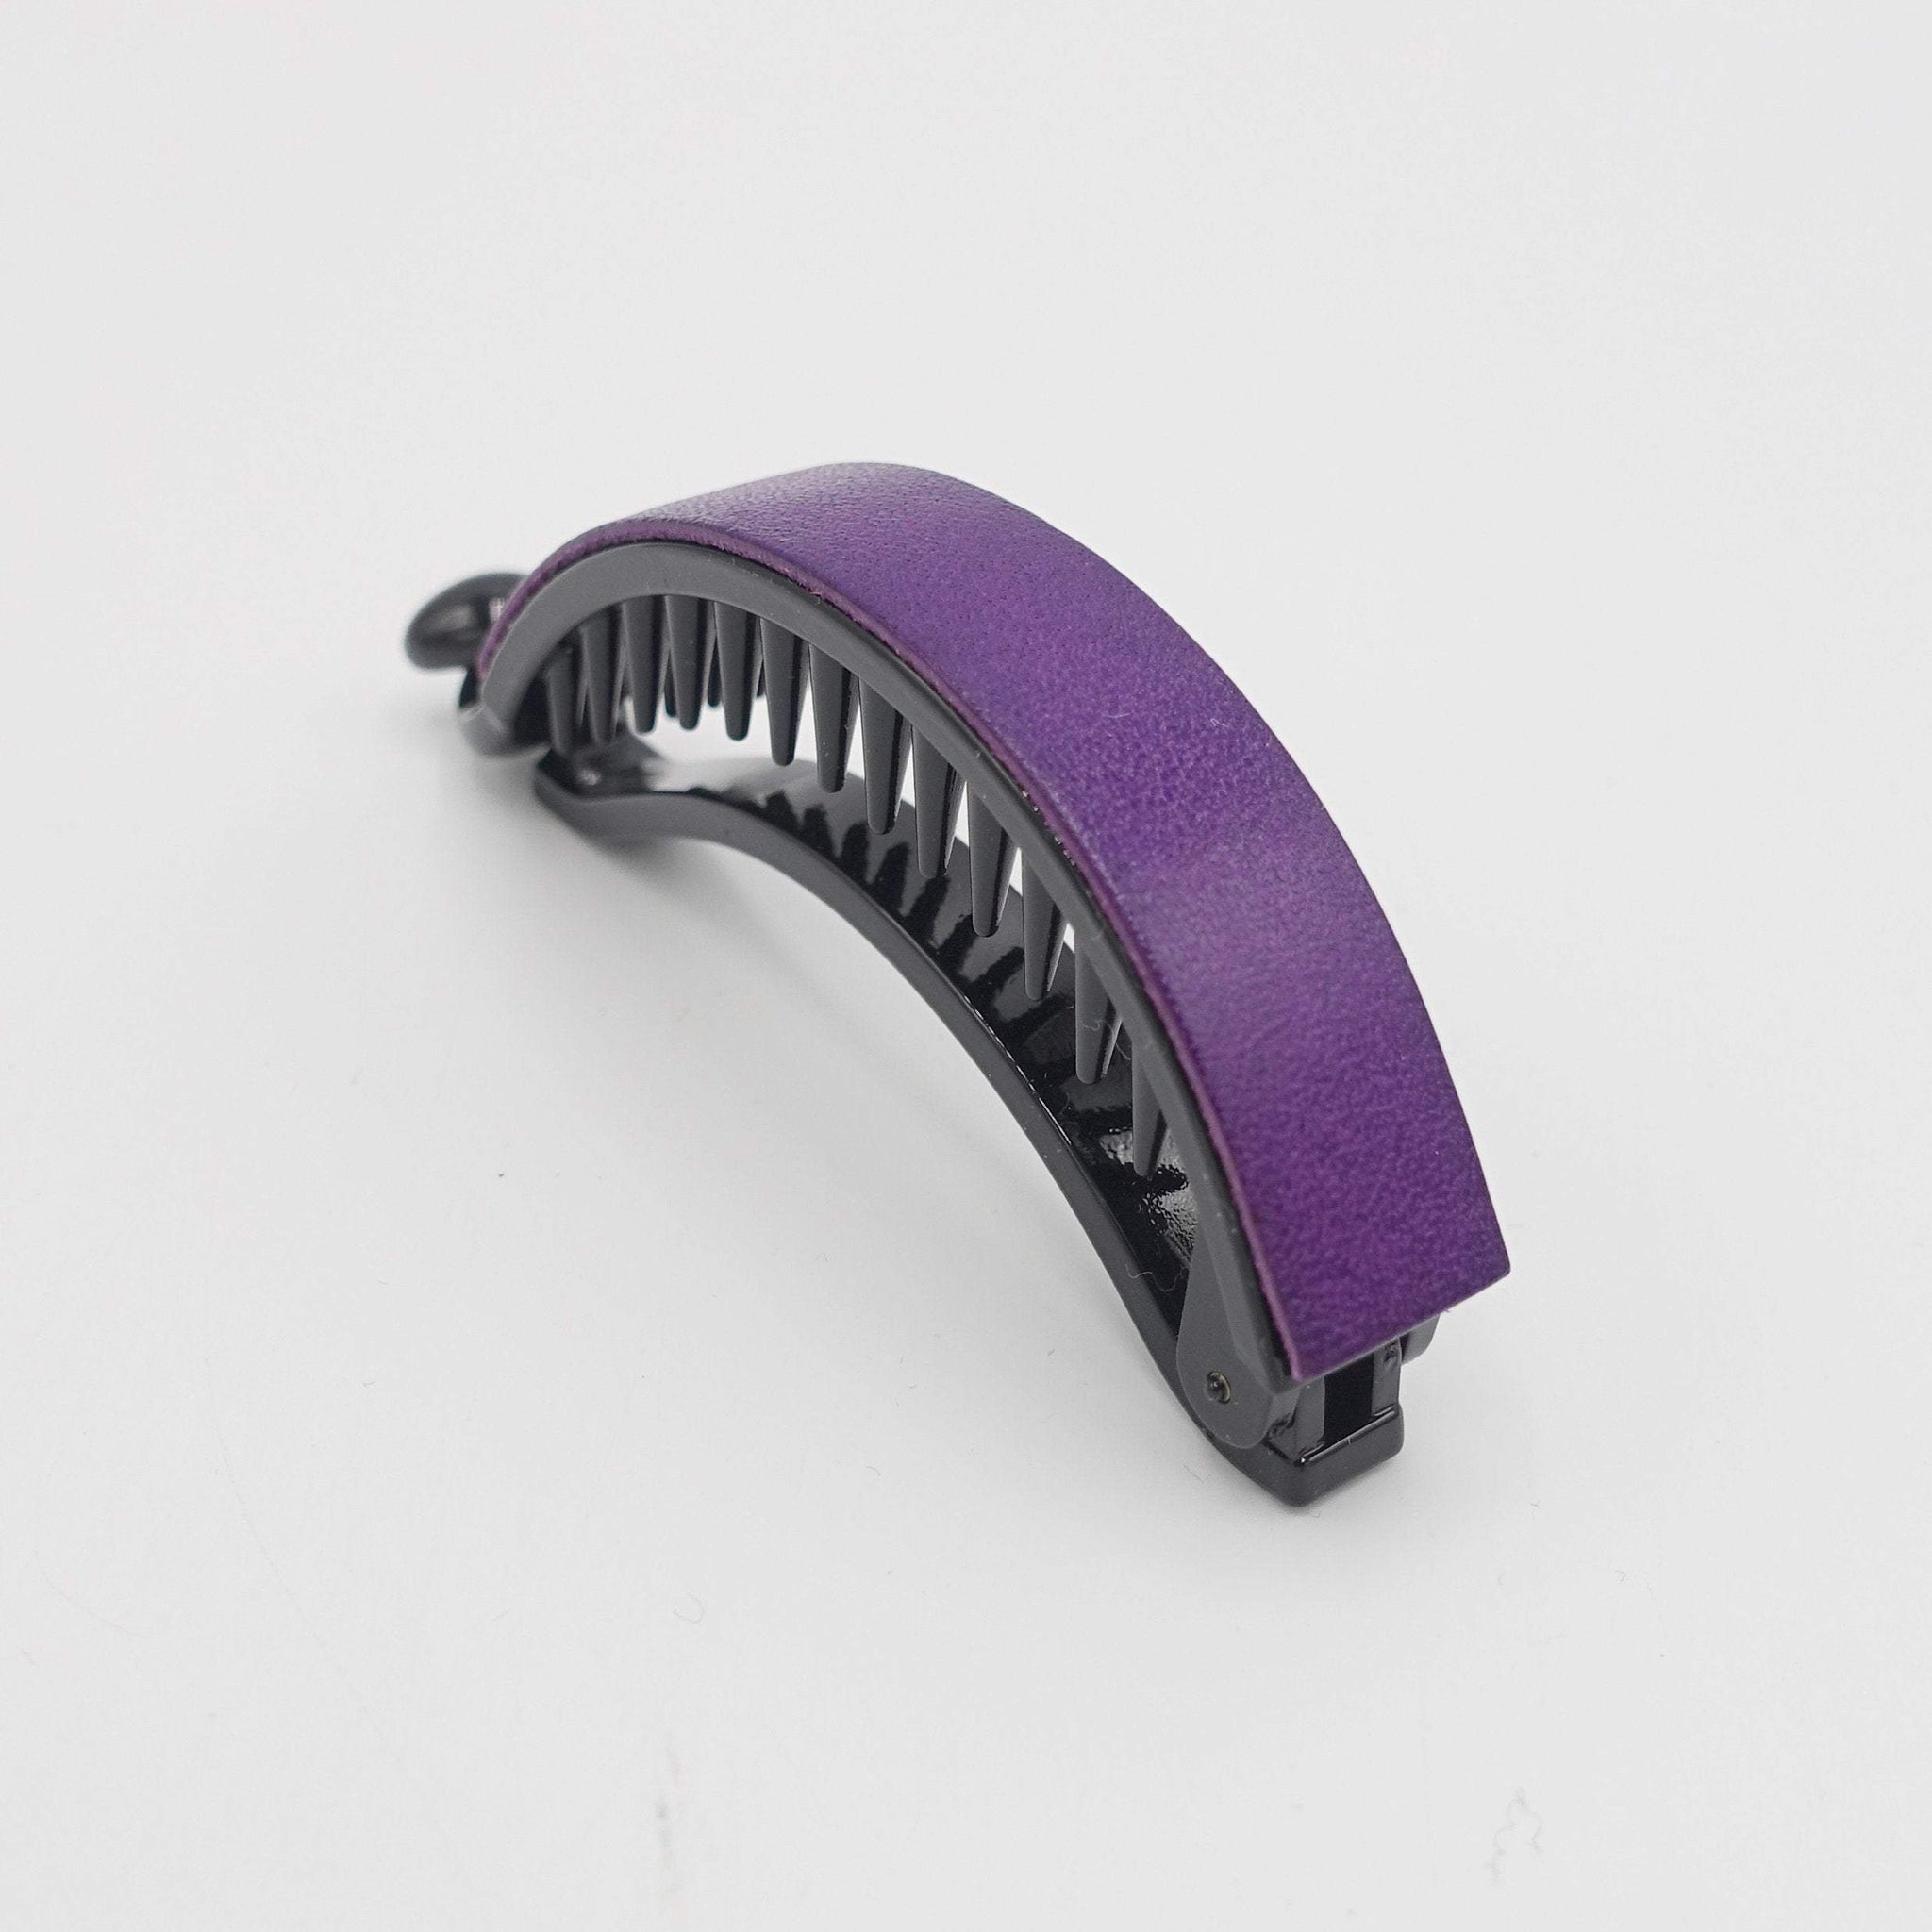 VeryShine Barrettes & Clips Purple genuine leather covered half moon hair claw basic woman hair accessory